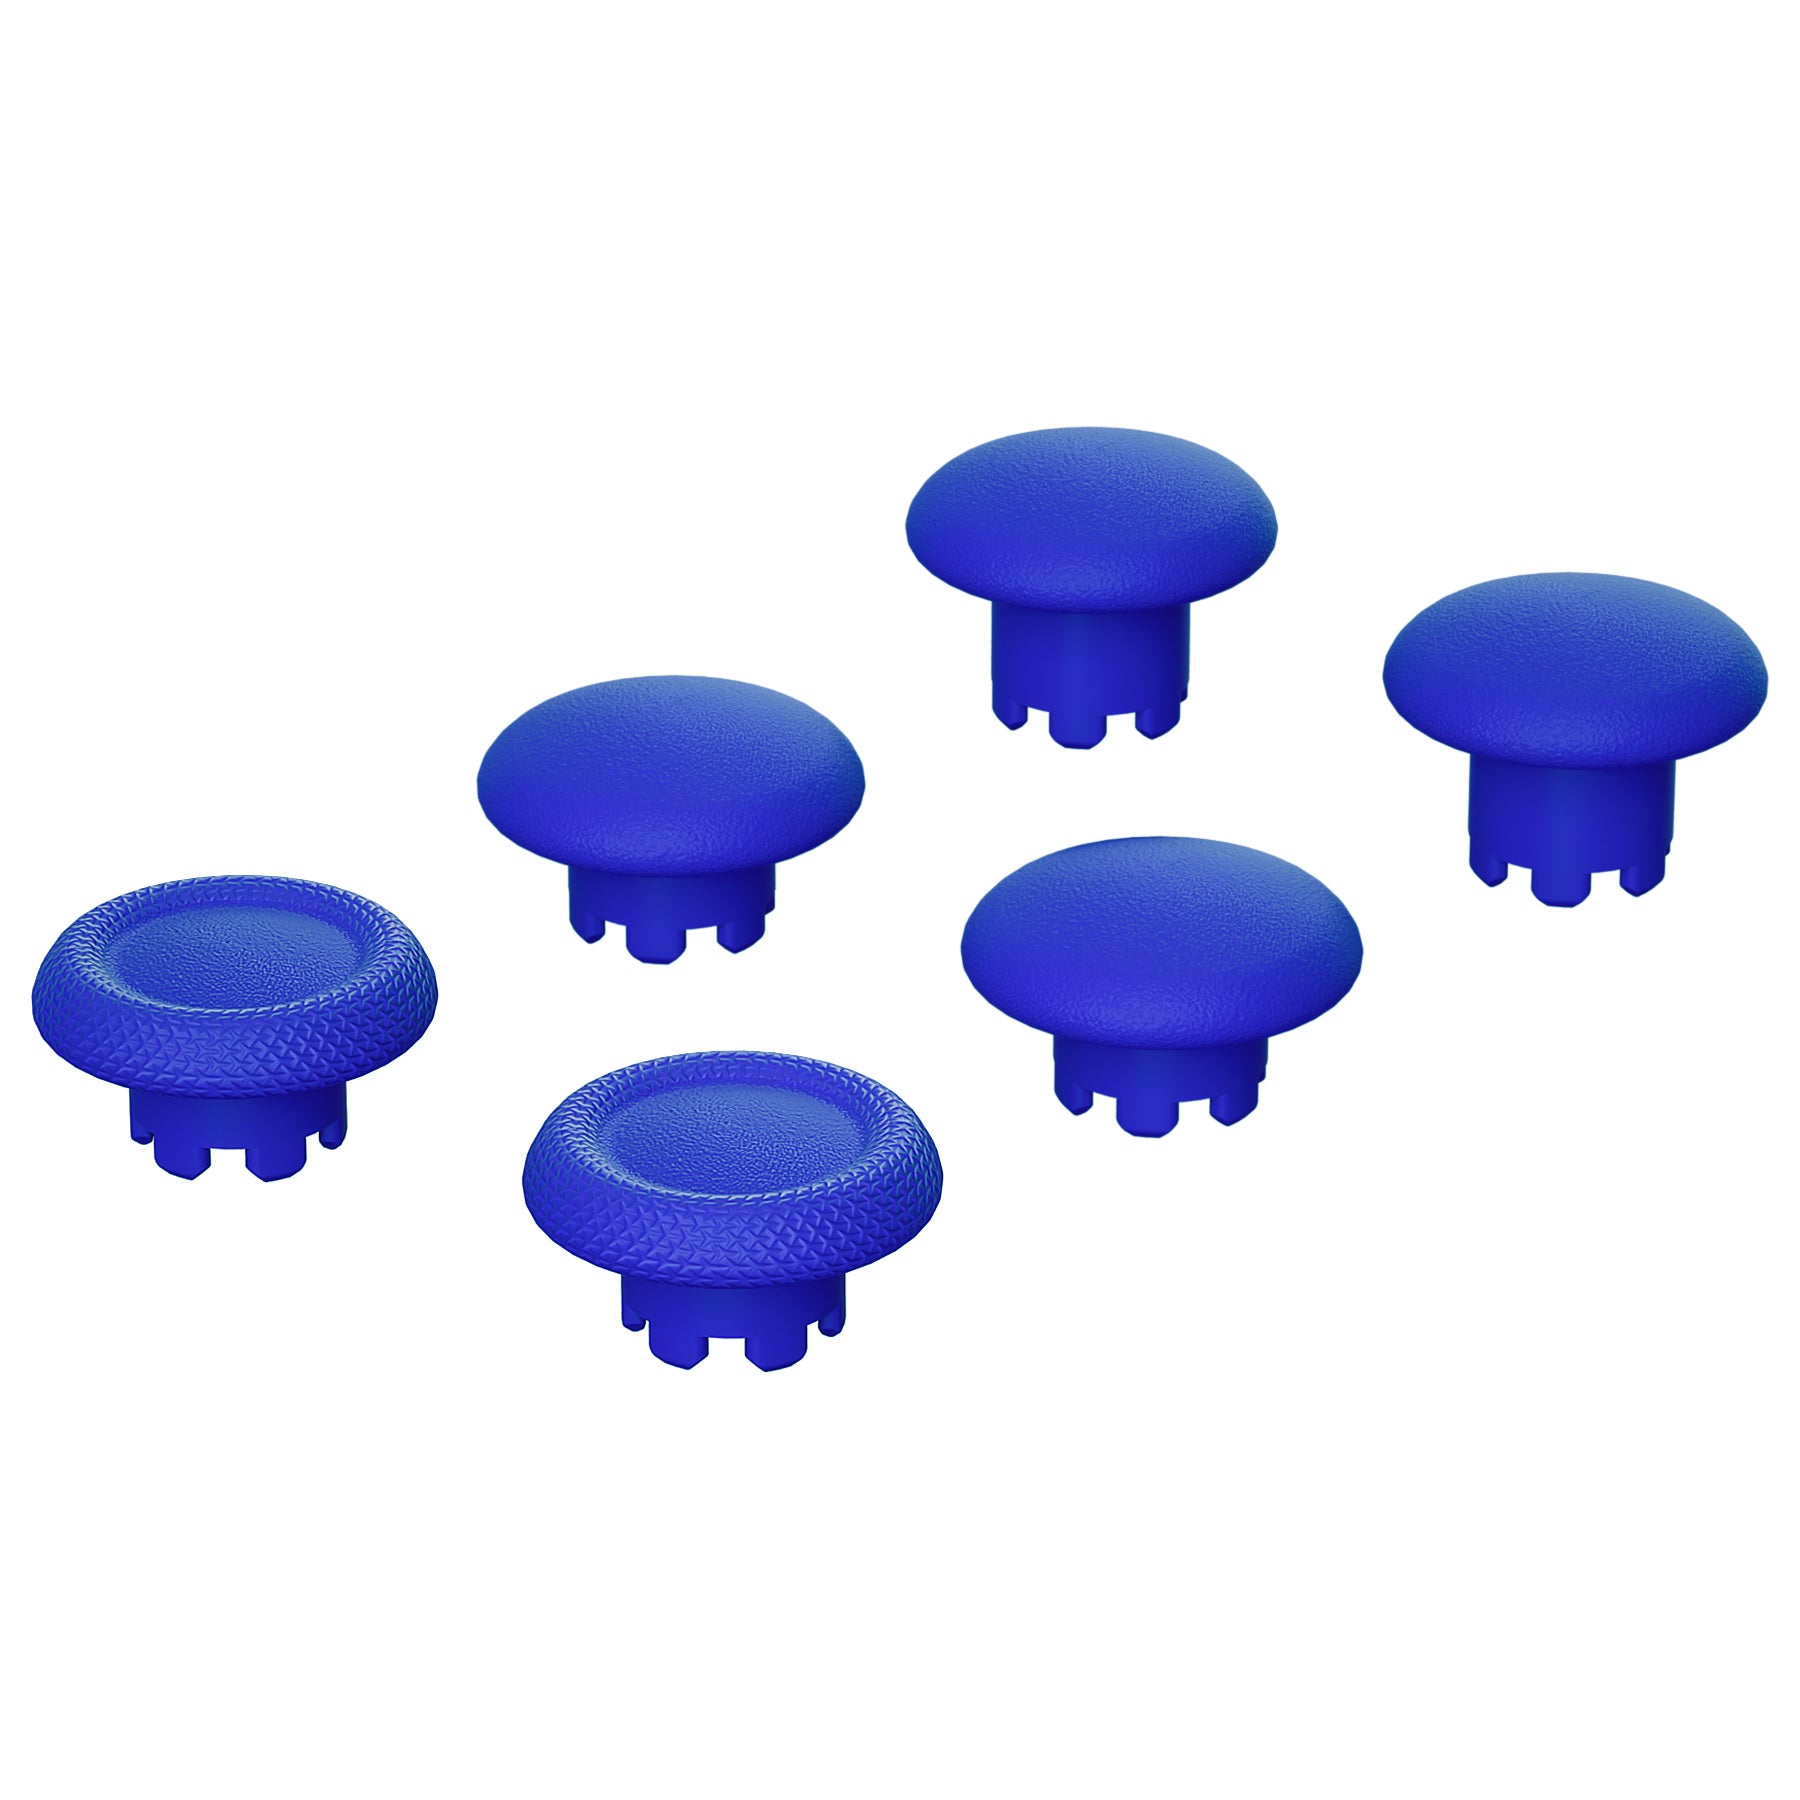 eXtremeRate Replacement Swappable Thumbsticks for PS5 Edge Controller - Blue eXtremeRate